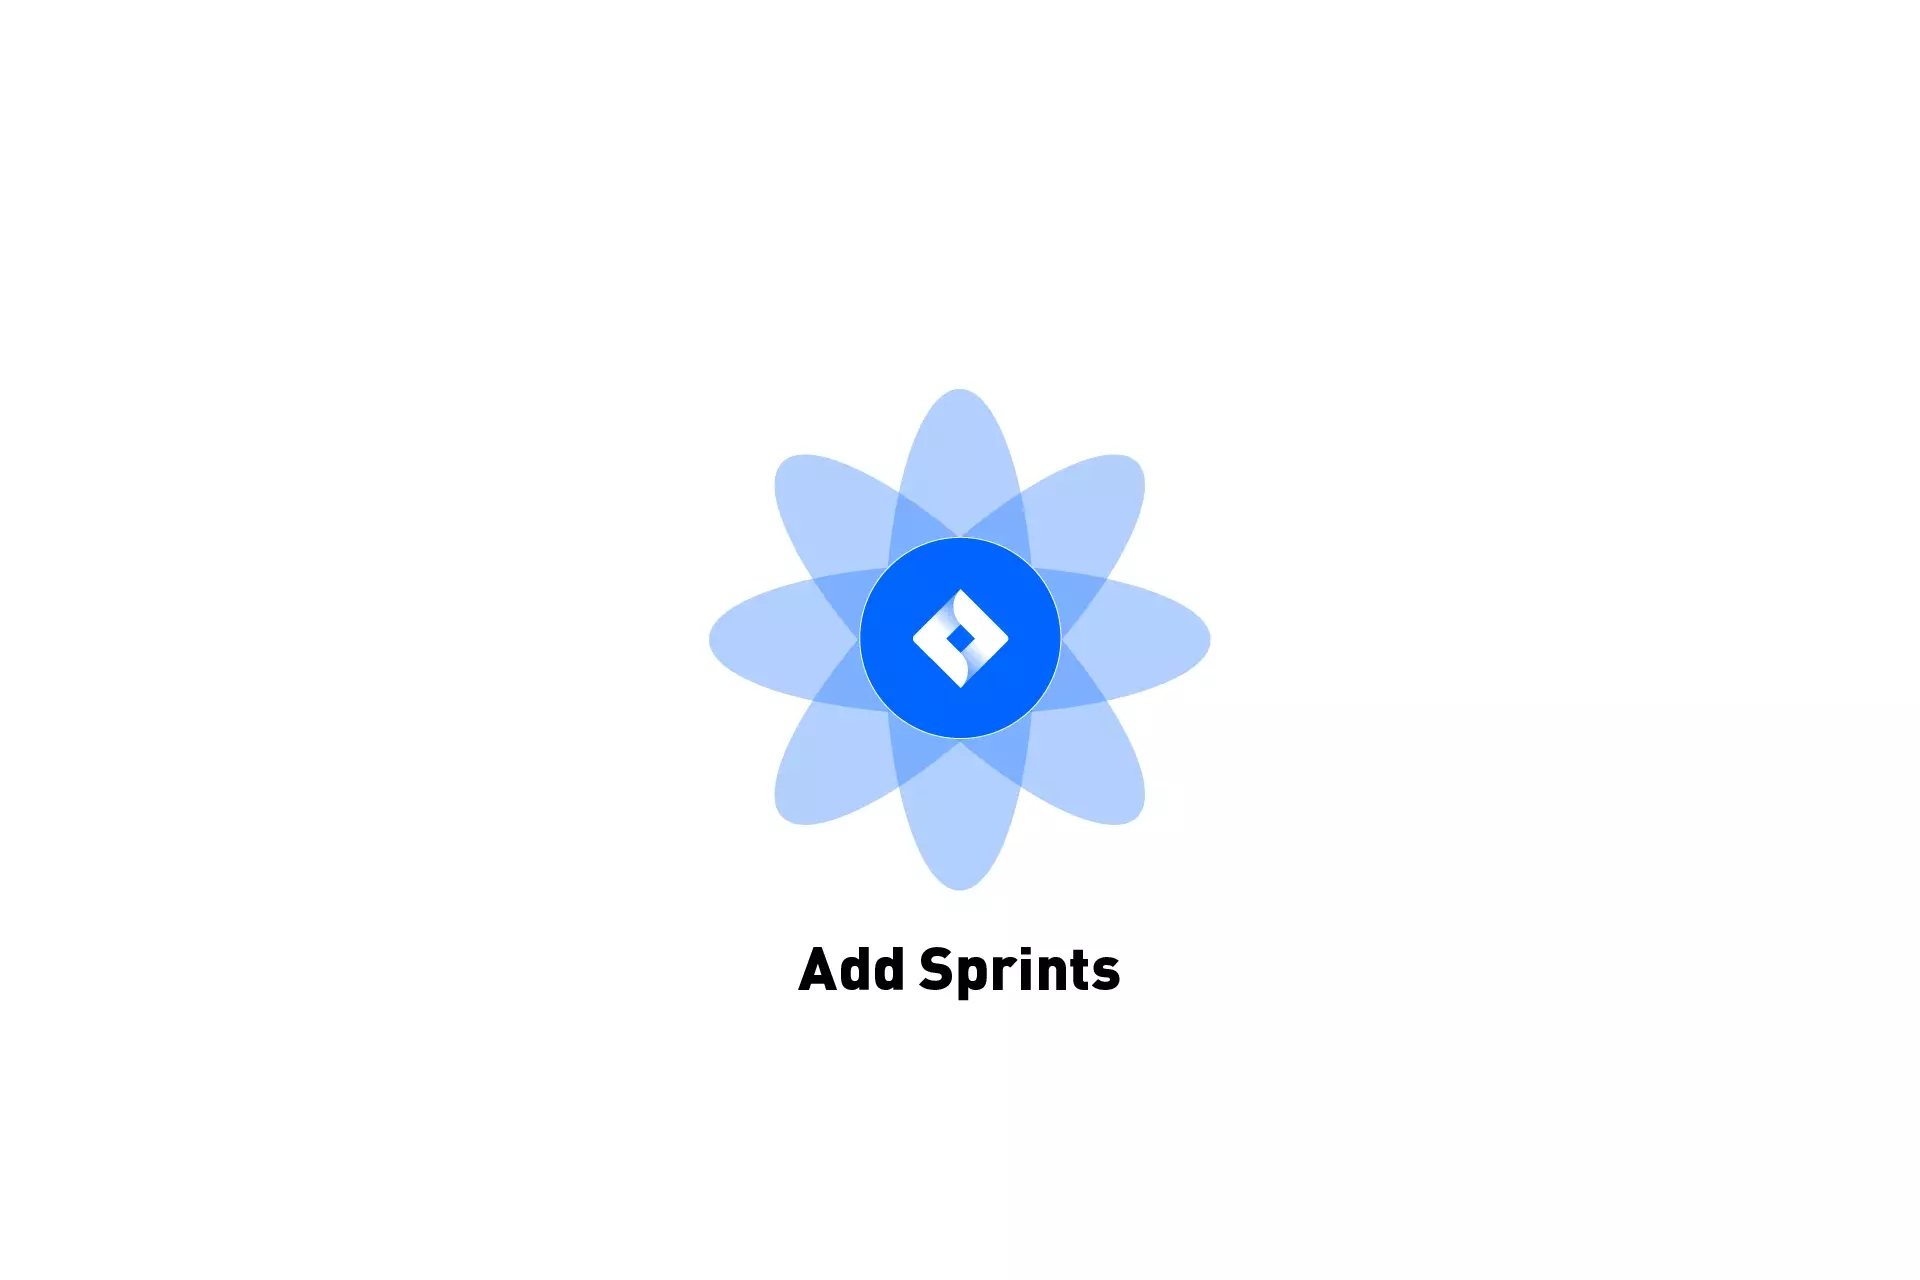 A flower that represents JIRA with the text "Add Sprints" beneath it.